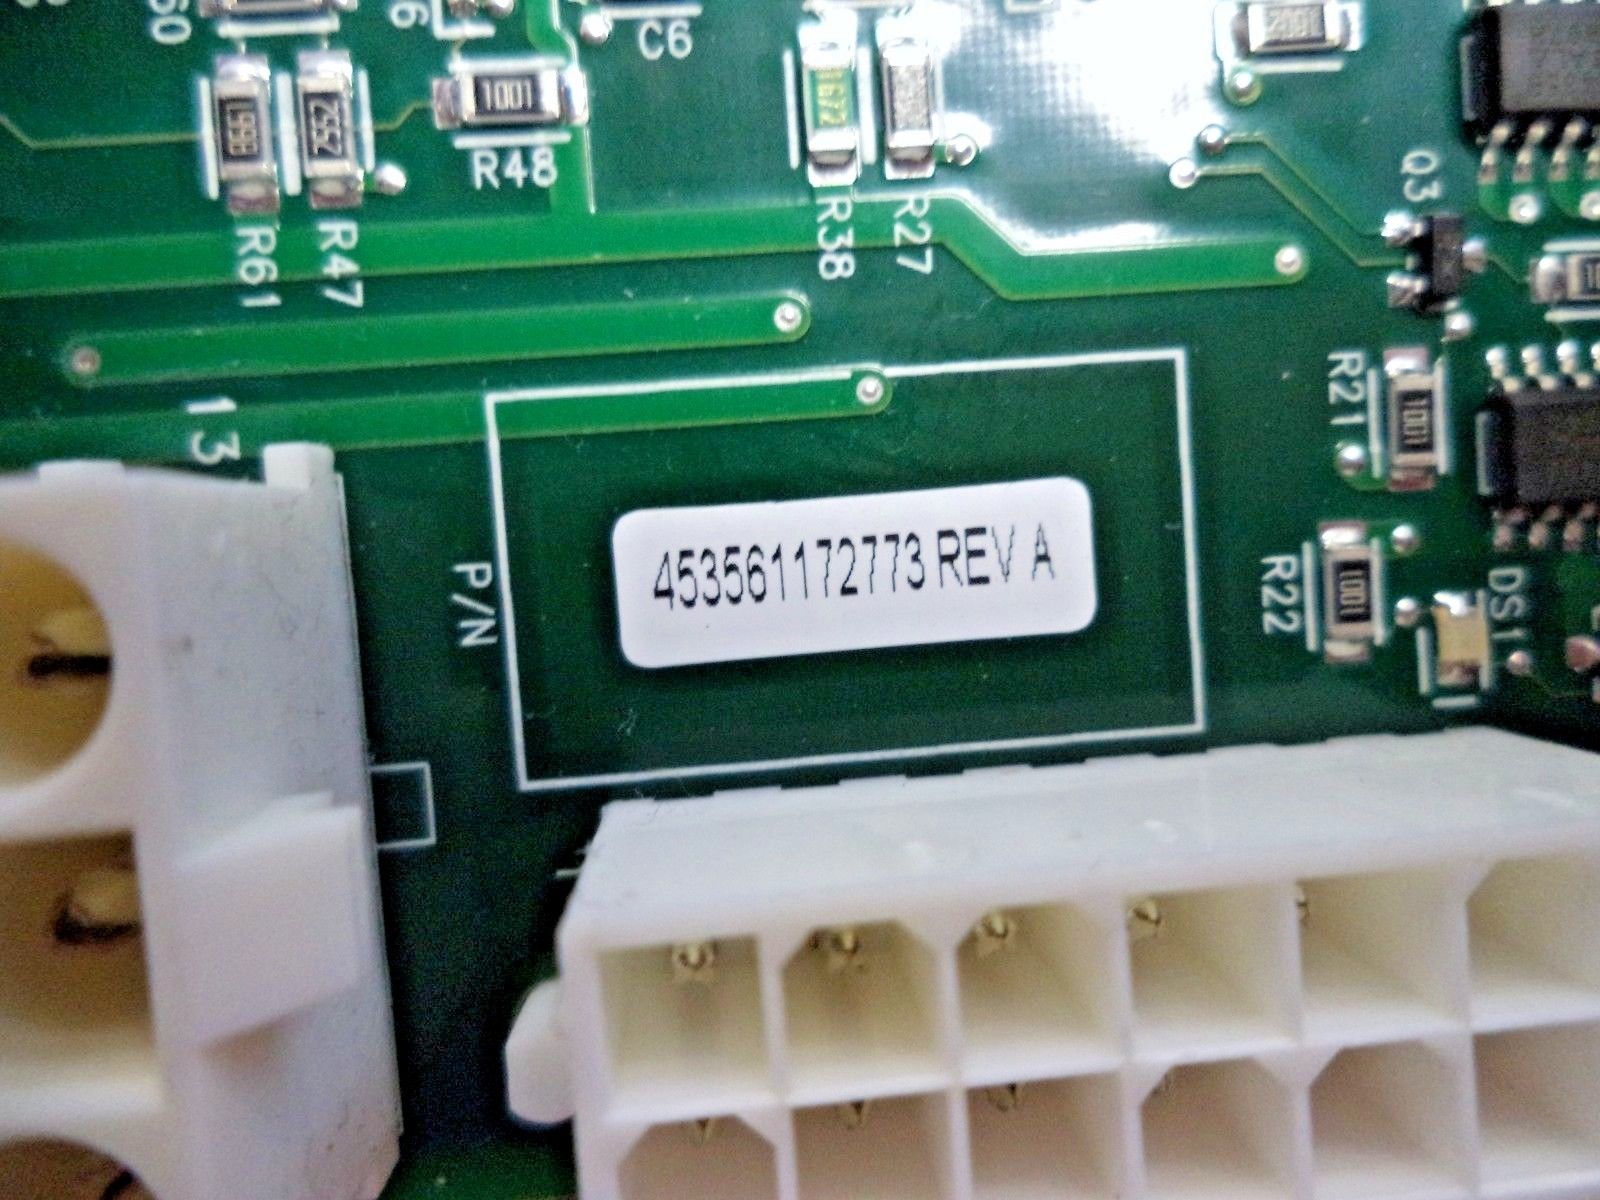 Philips IU22 Ultrasound Acquisition Power Distribution Board  (PN: 453561172773)